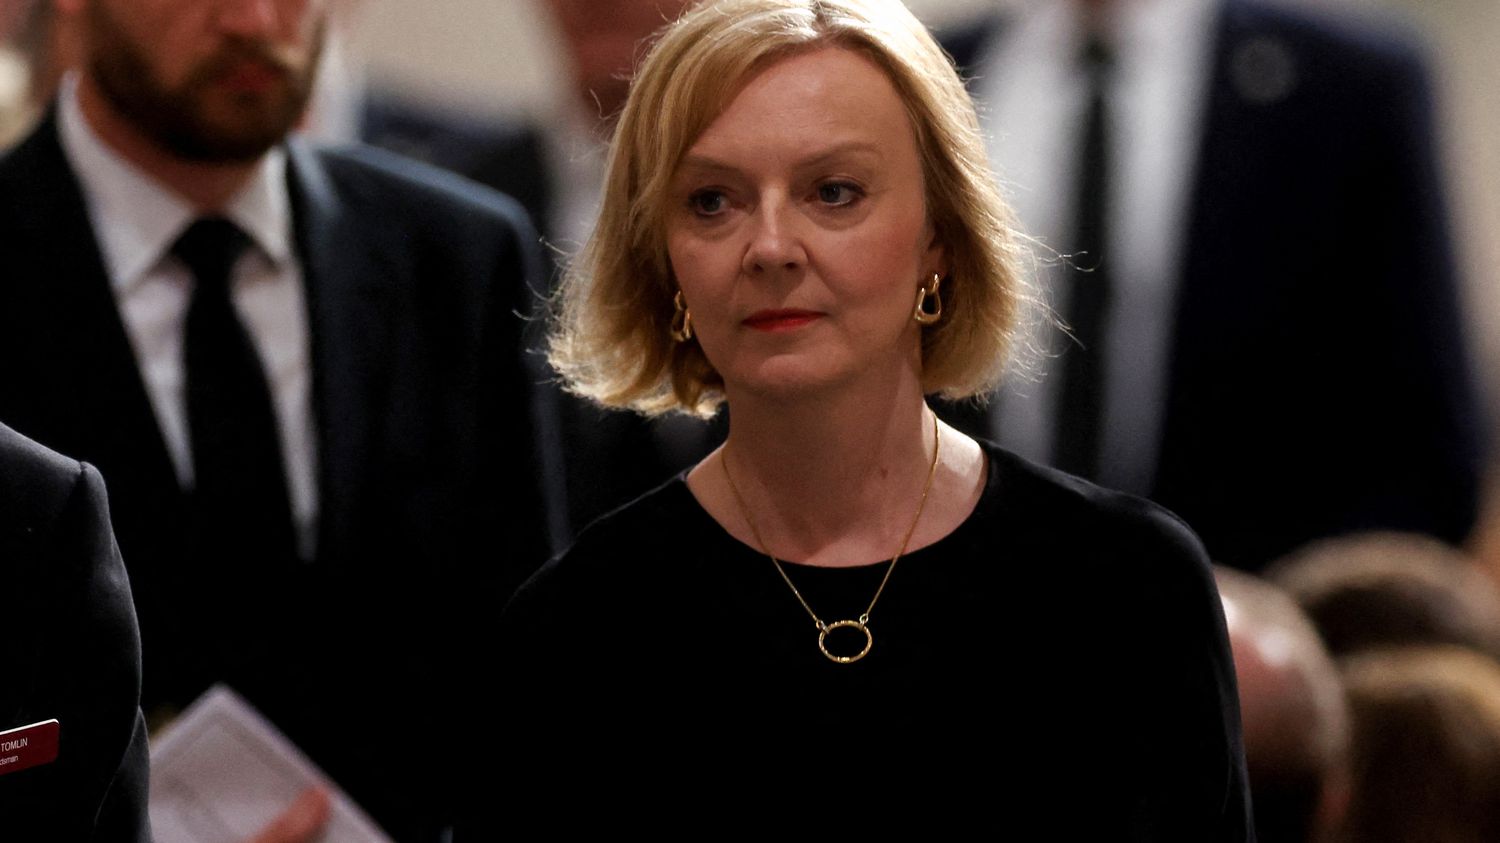 Death of Elizabeth II: the crazy week of Liz Truss, the new Prime Minister of the United Kingdom
